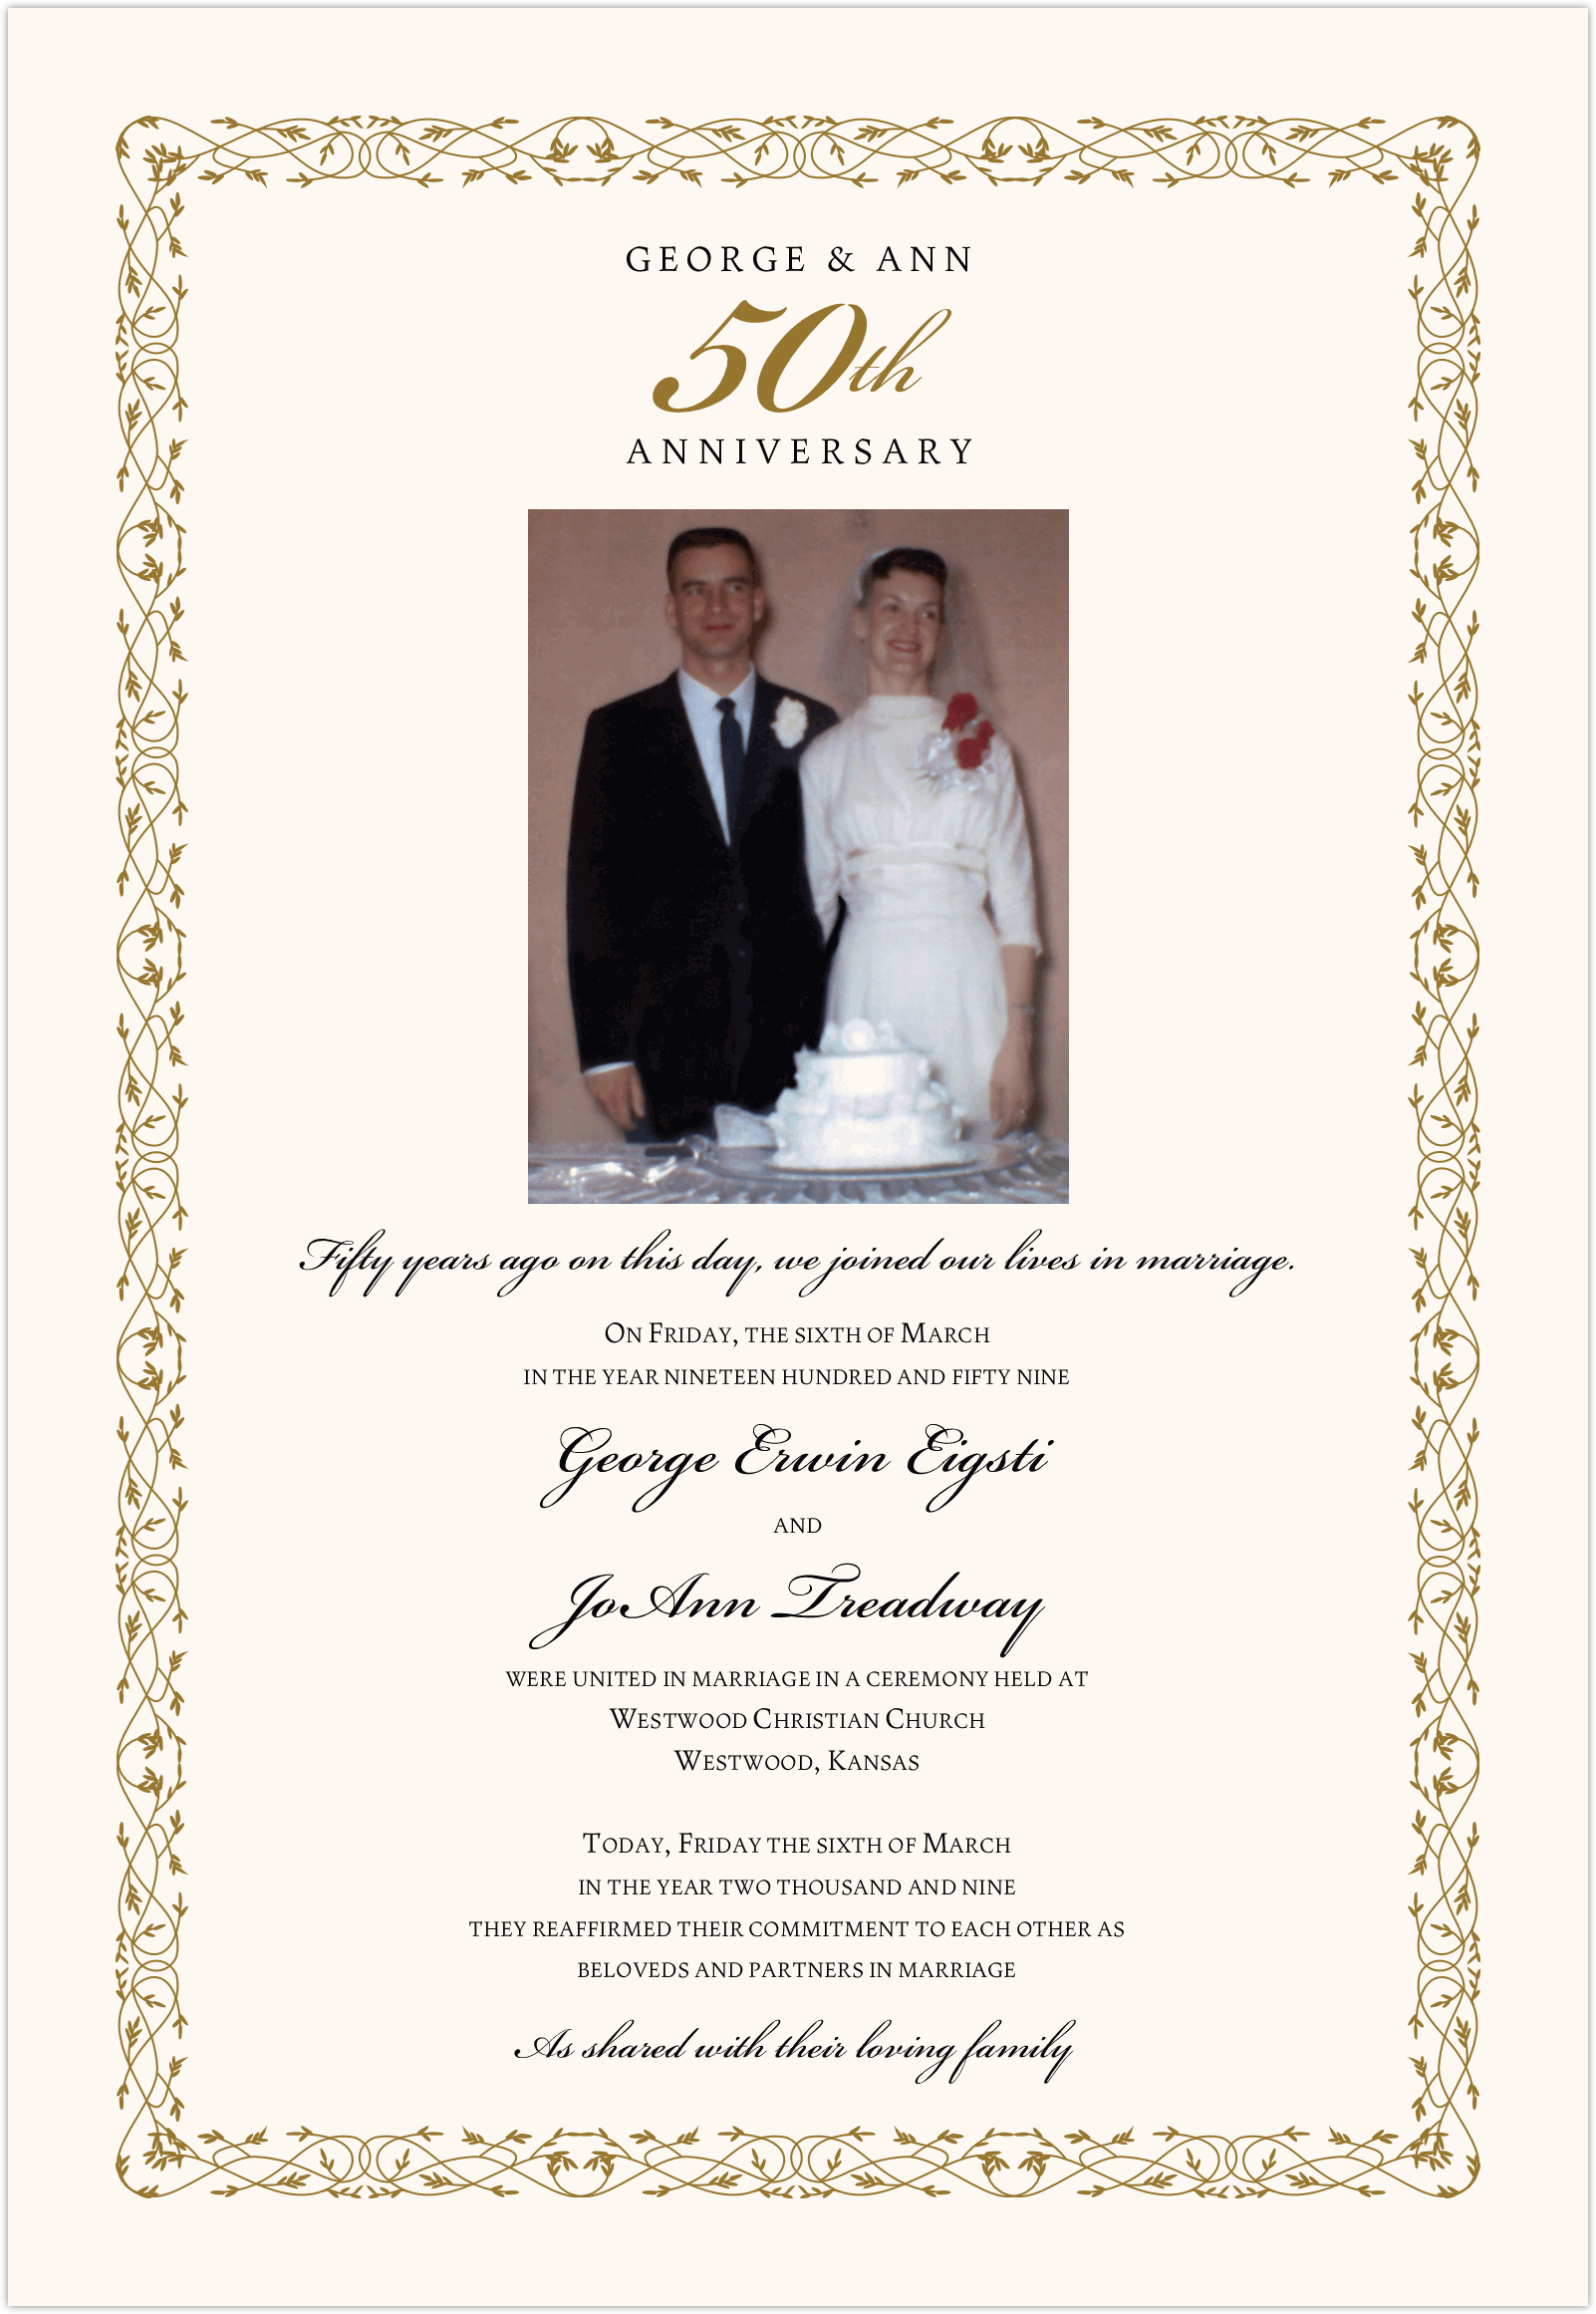 50th Wedding Anniversary Certificate Renewal of VowsMarriage